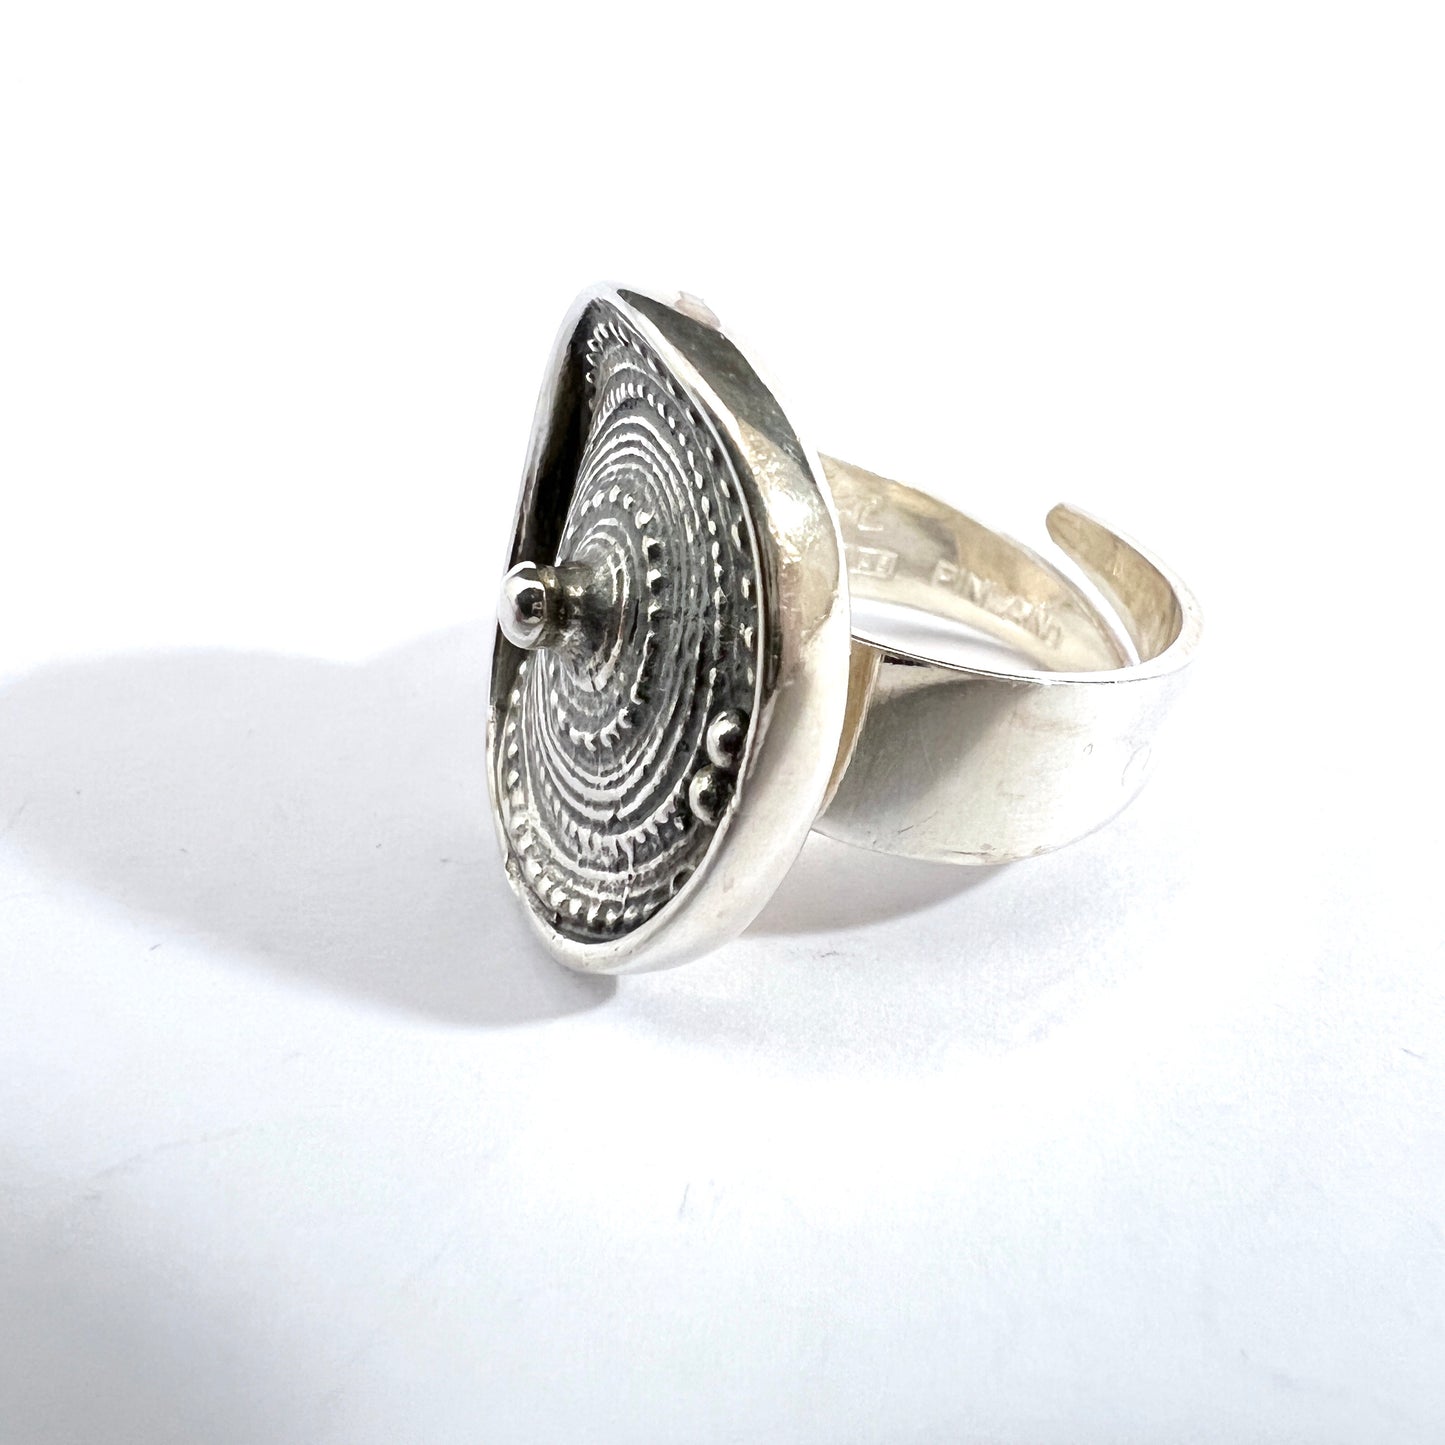 Jorma Laine for Turun Hopea Finland 1978. Solid Silver Ring. Design "Chic". Signed.